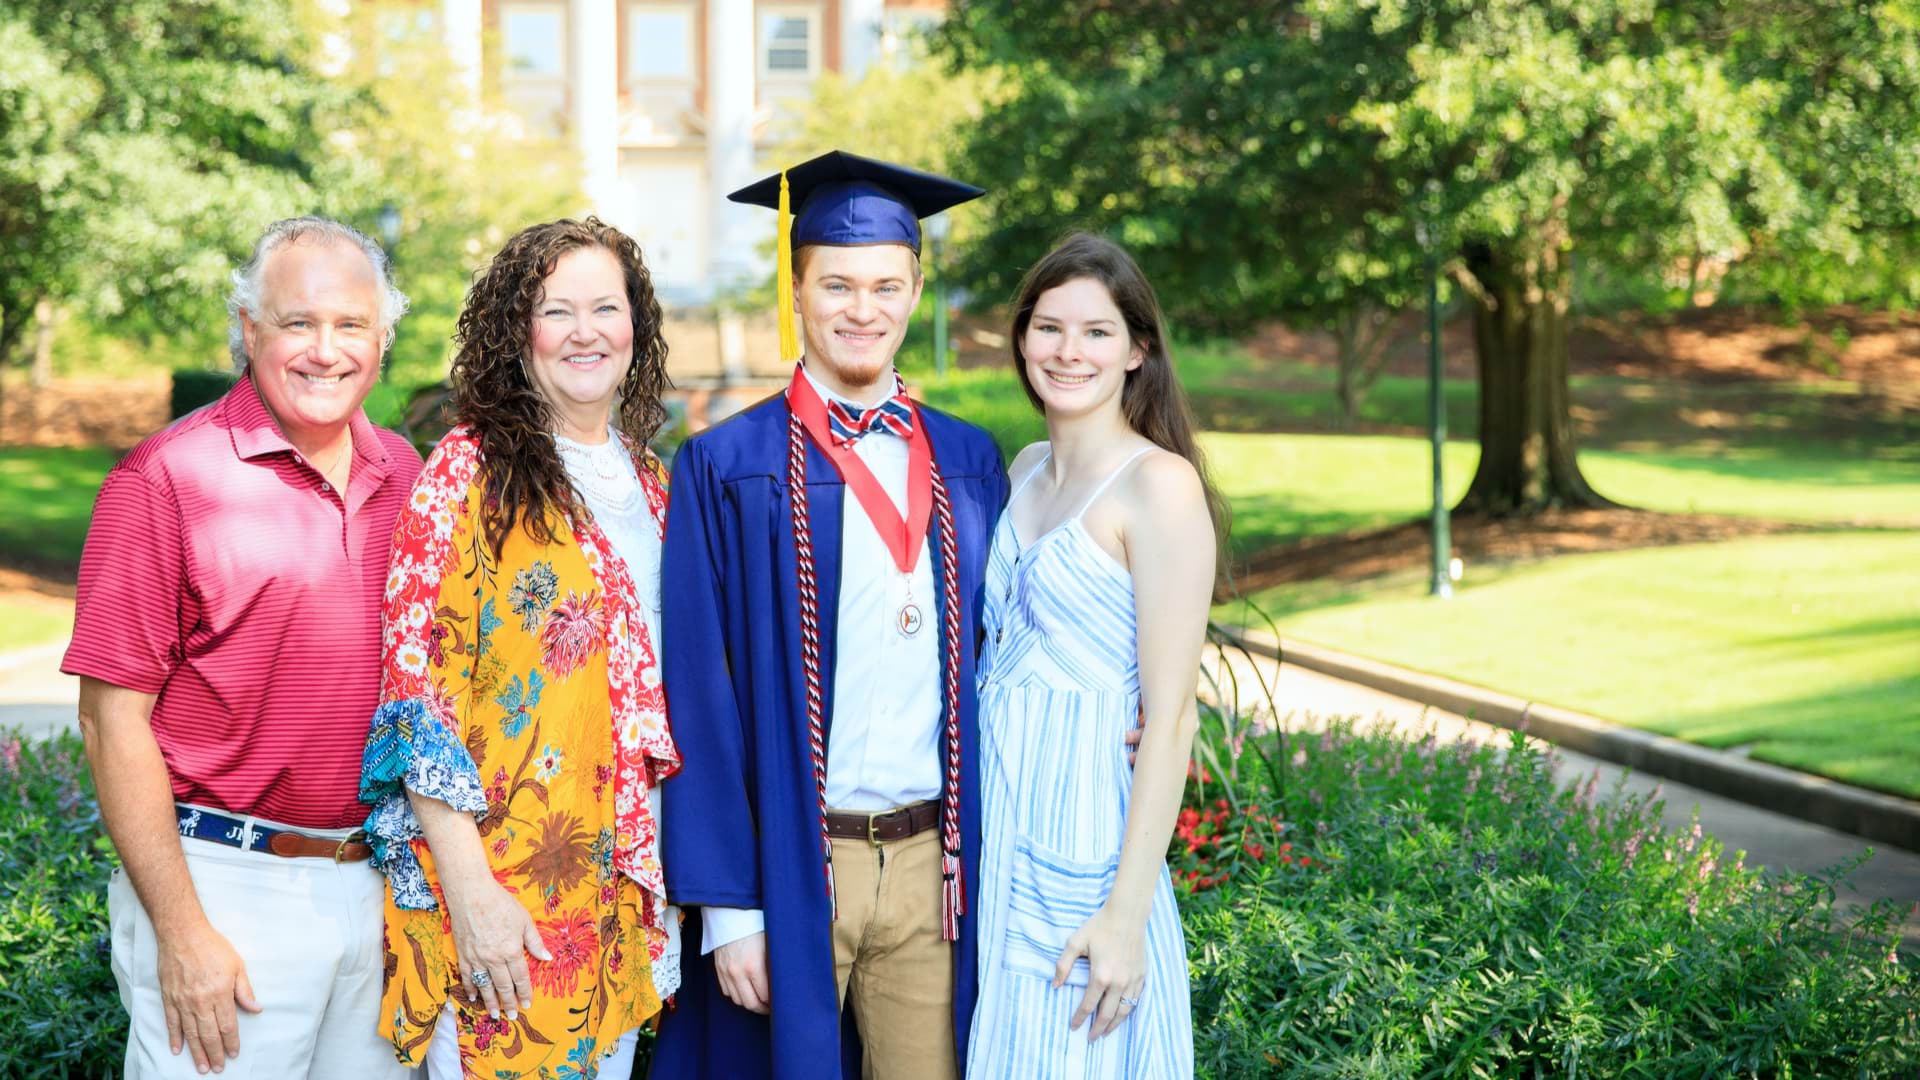 A new alumnus and his family